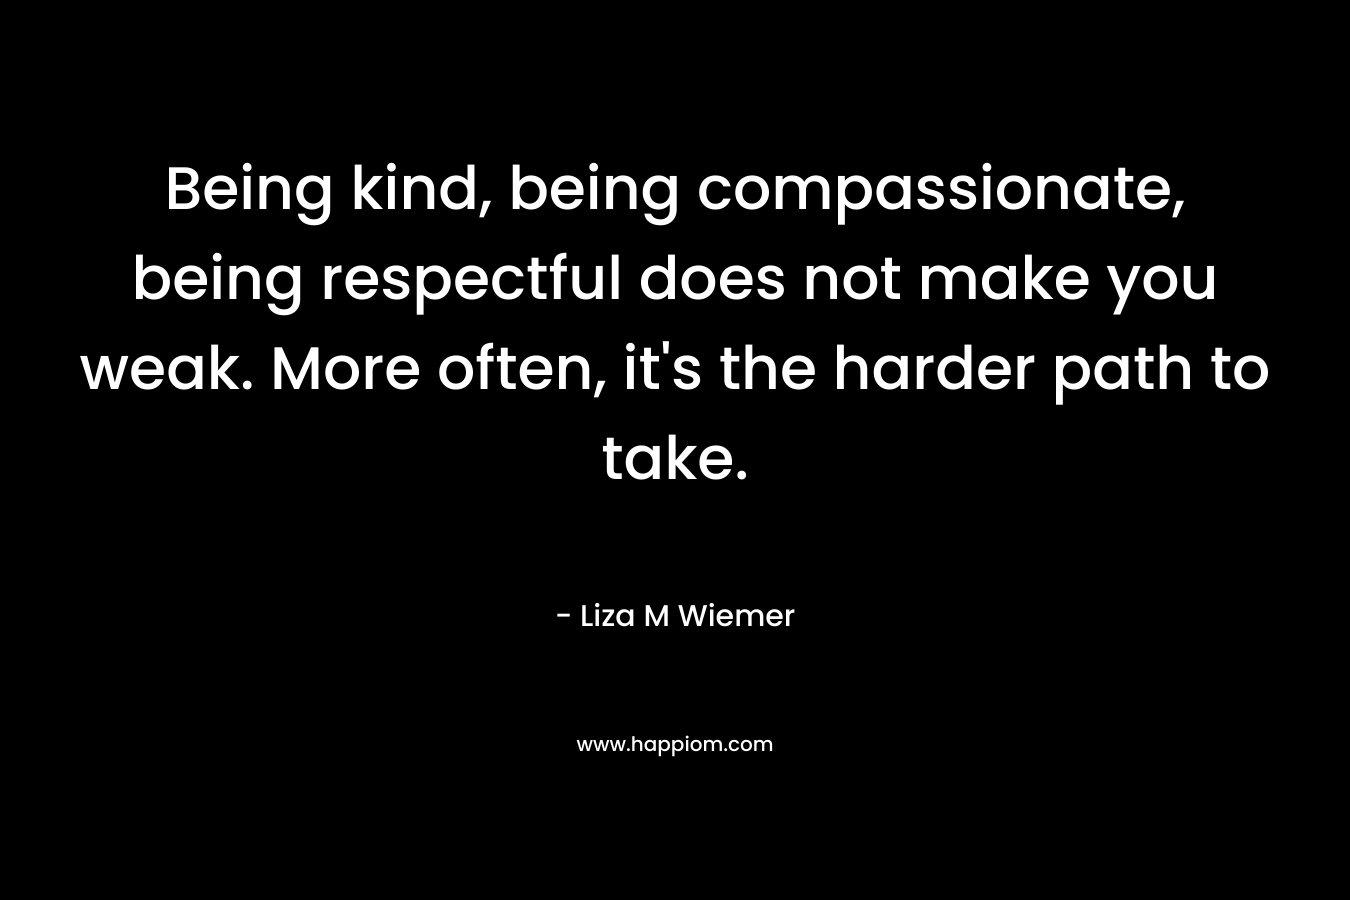 Being kind, being compassionate, being respectful does not make you weak. More often, it's the harder path to take.